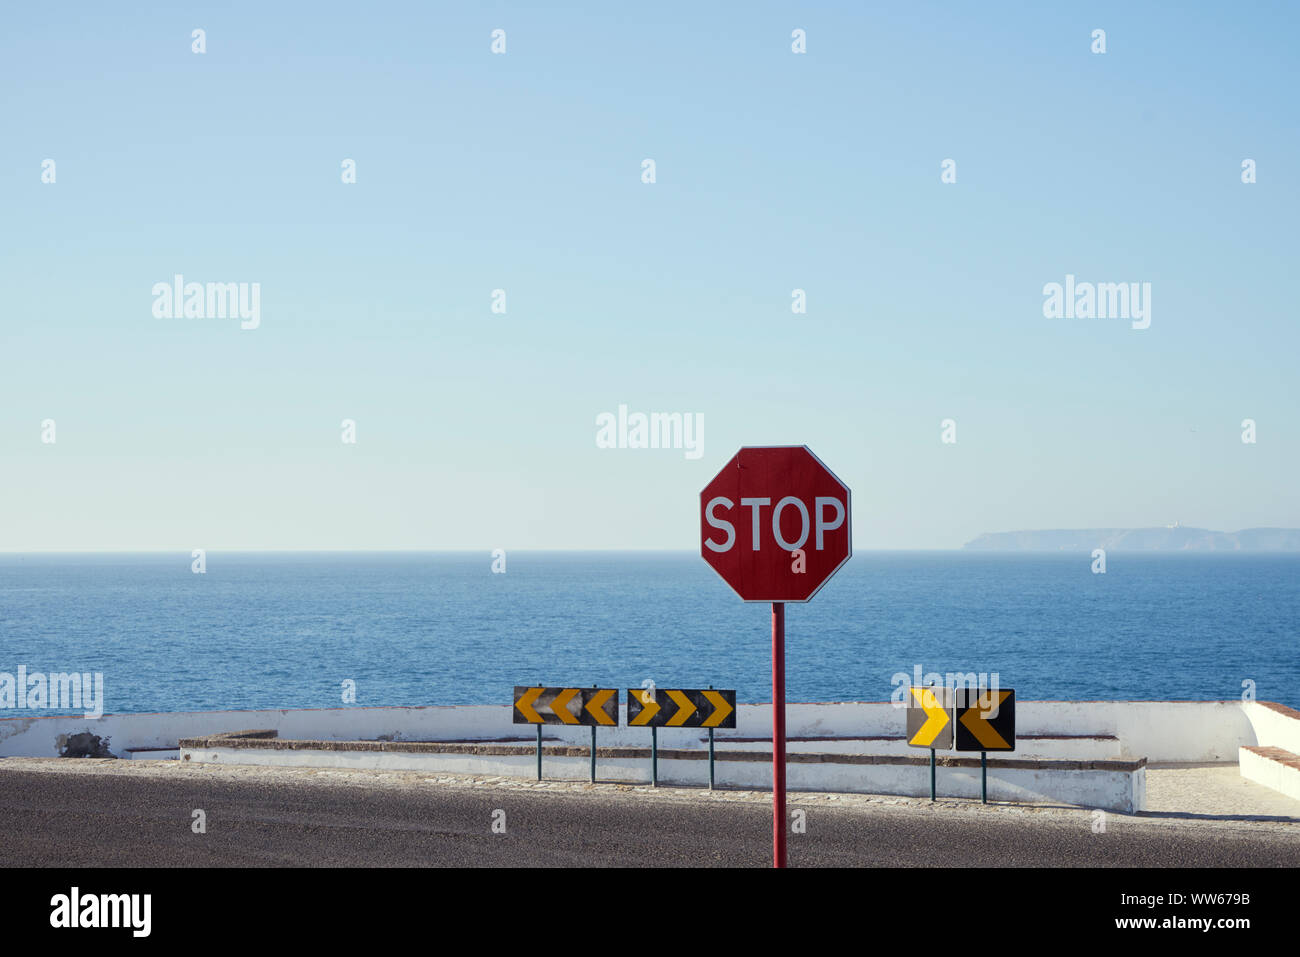 Stop sign on a street by the sea Stock Photo